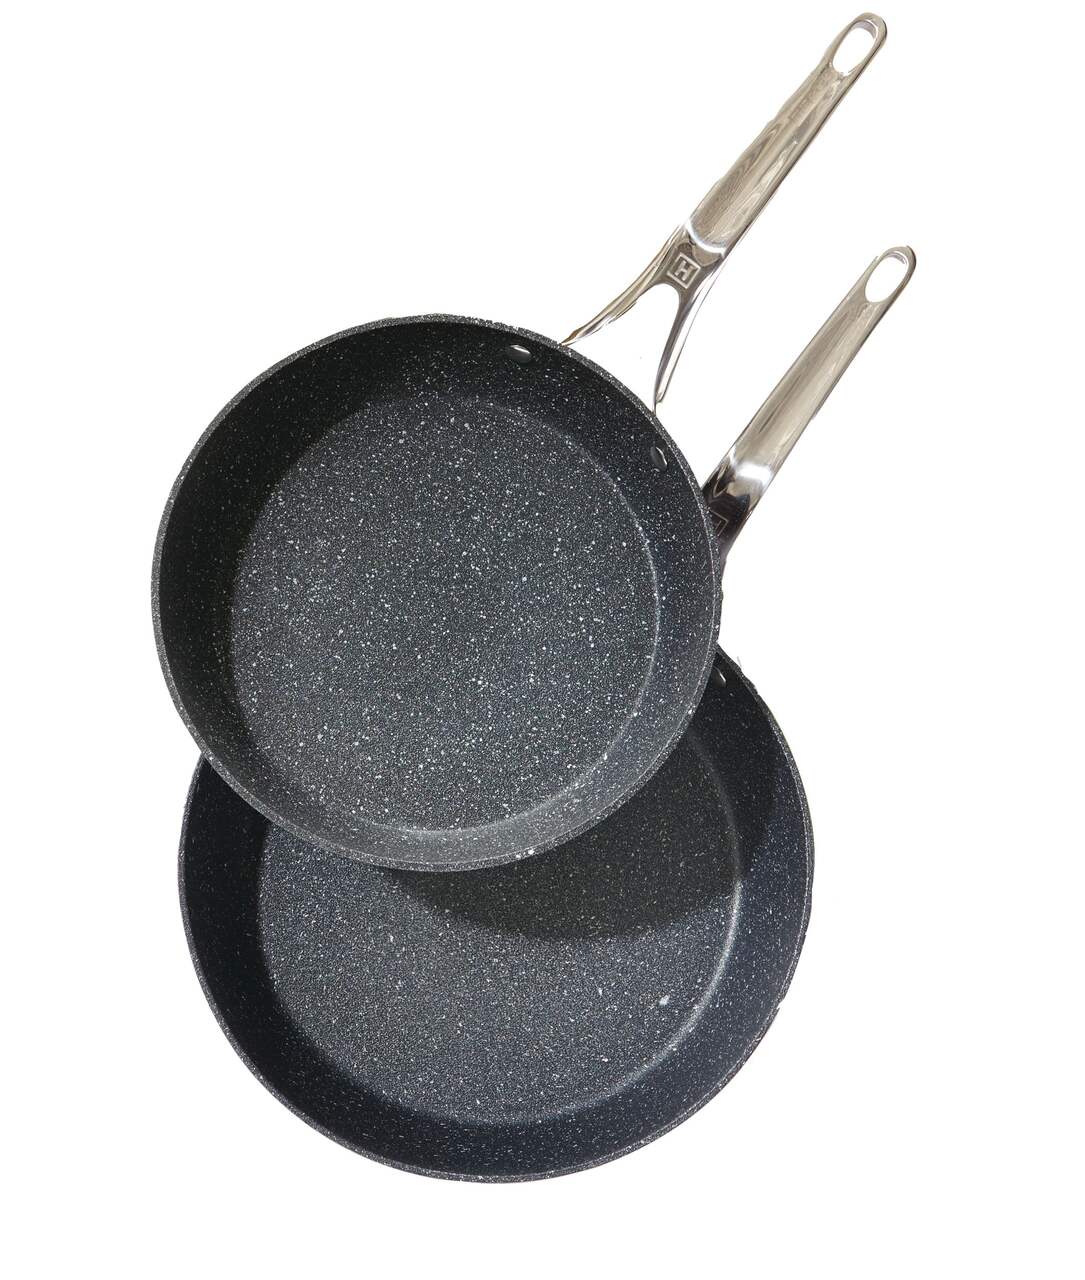 https://media-www.canadiantire.ca/product/living/kitchen/cookware/2992758/heritage-the-rock-2-pack-frypans-026d4c68-1898-4981-9666-368ddc01d10e-jpgrendition.jpg?imdensity=1&imwidth=1244&impolicy=mZoom